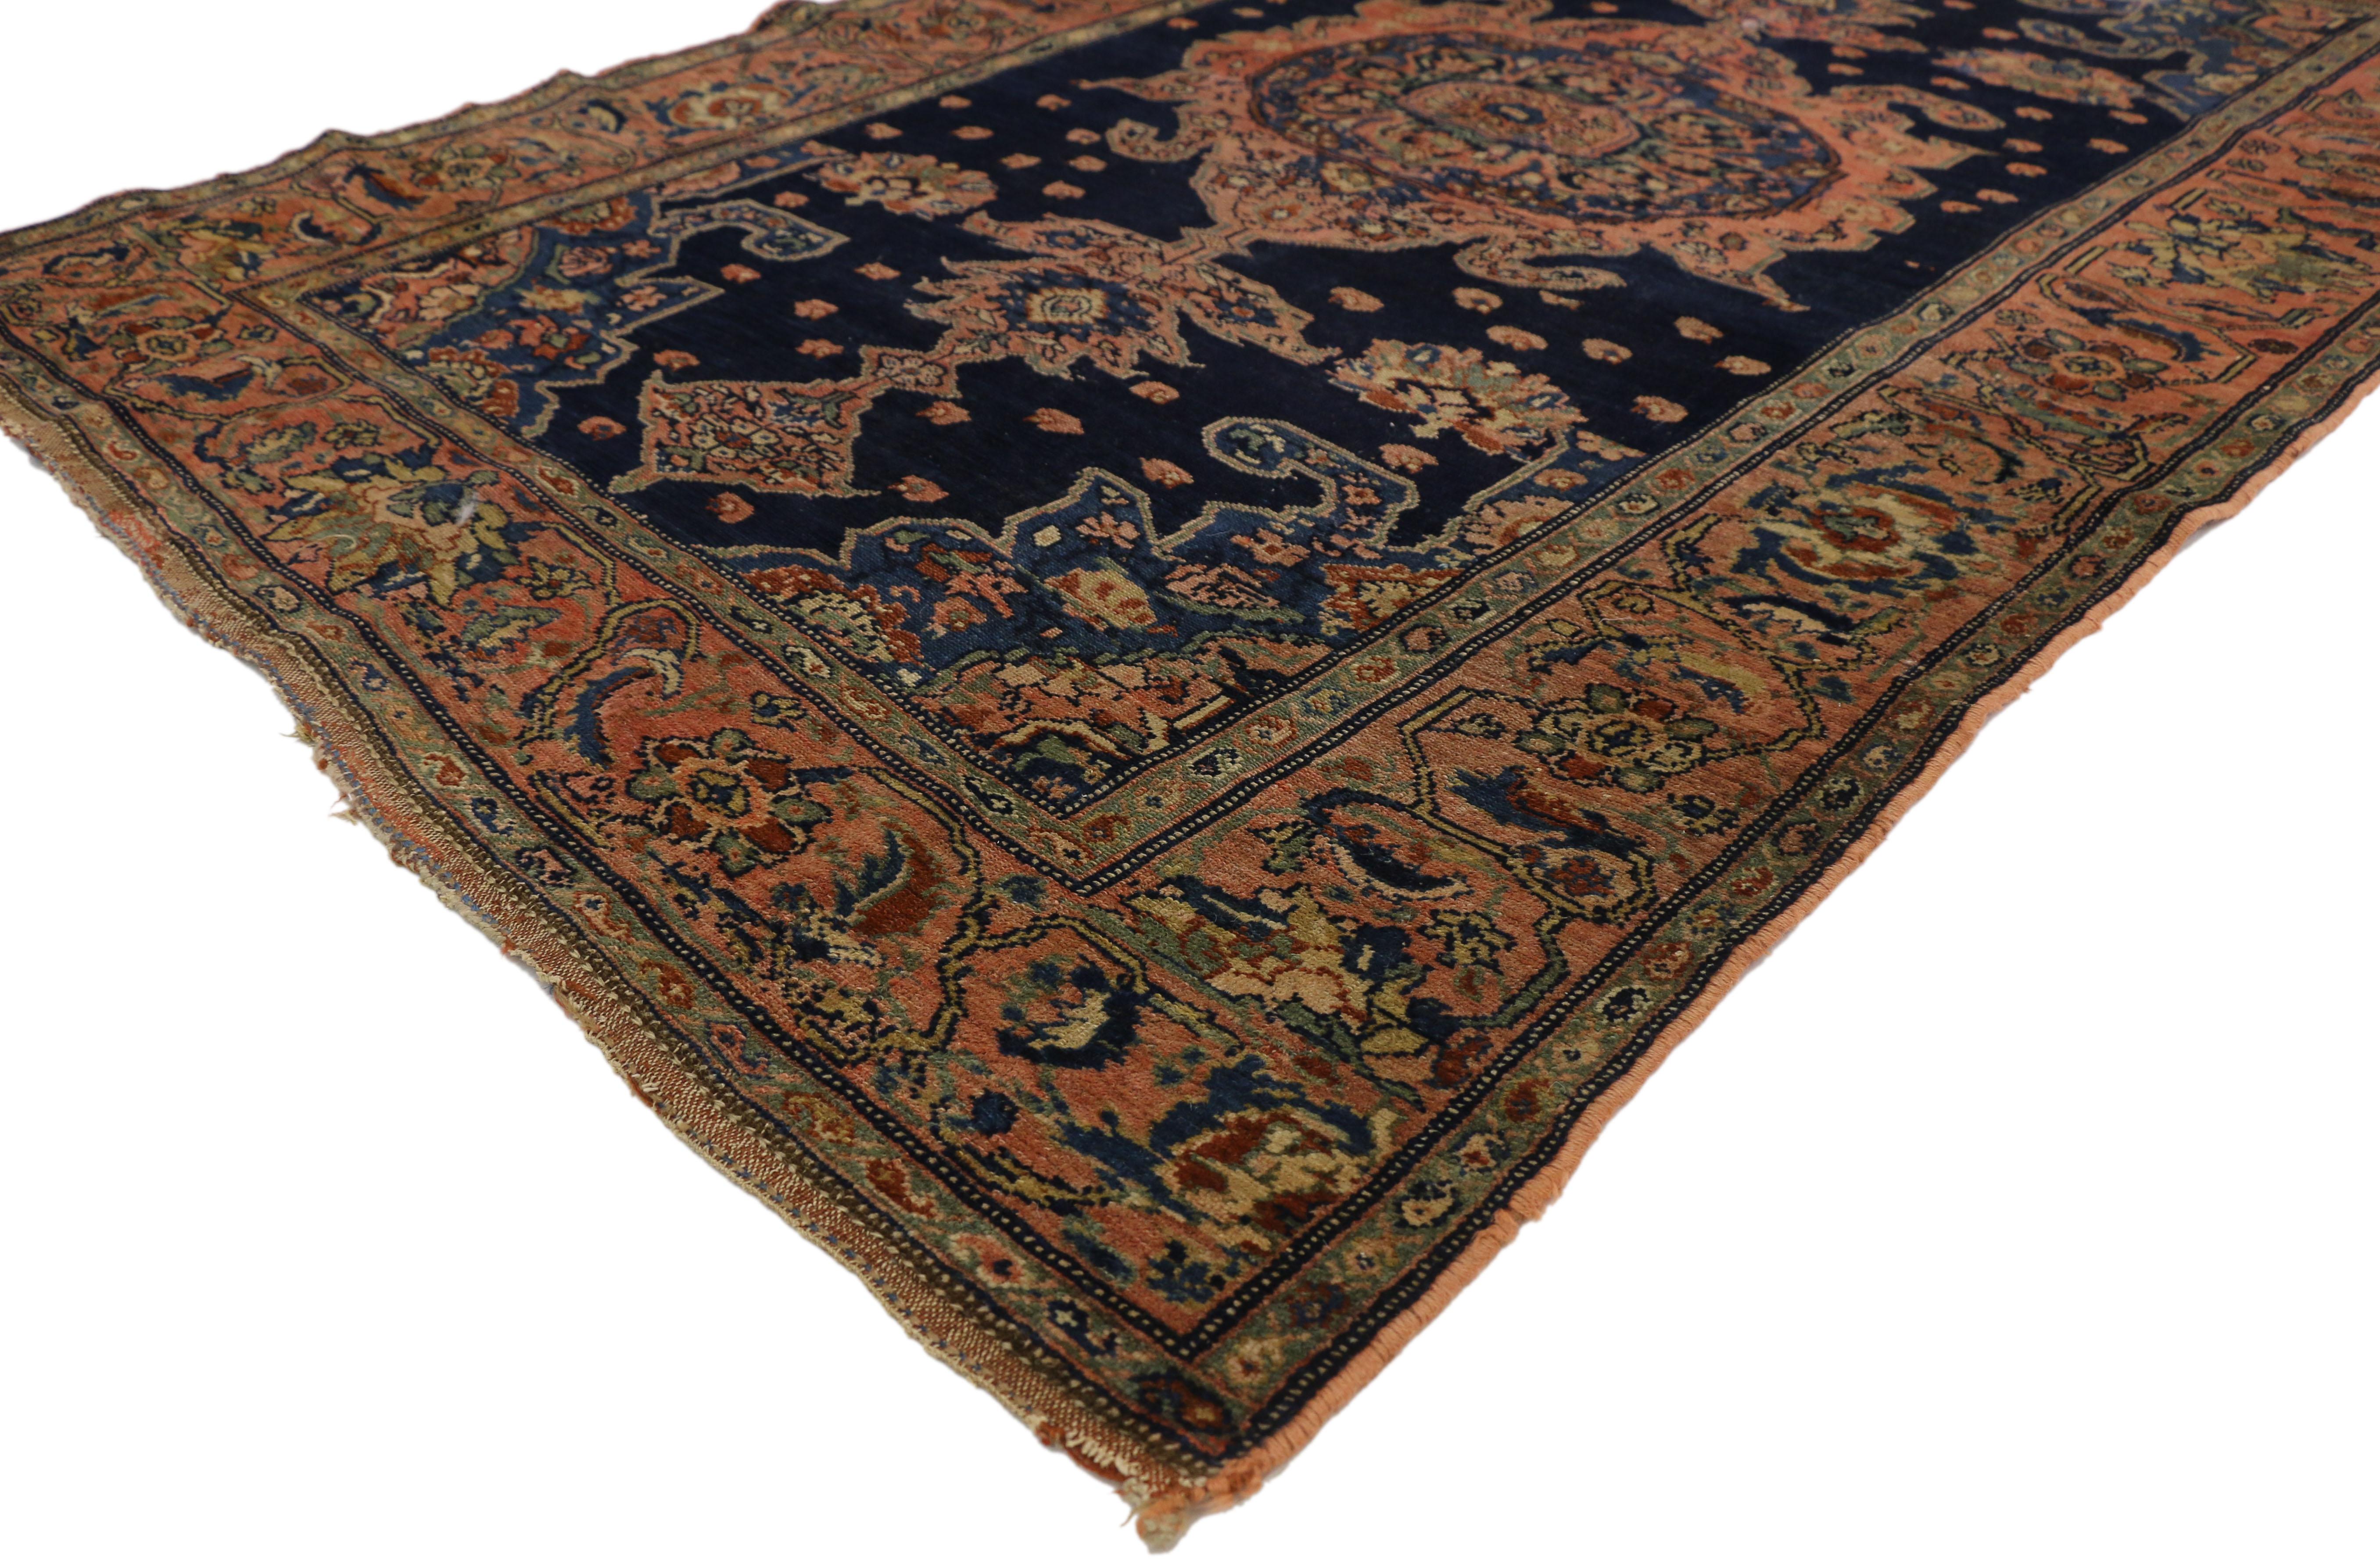 77286, antique Persian Malayer rug for entry, kitchen, foyer, or bathroom. This hand knotted wool antique Persian Malayer rug features a cusped round central medallion anchored with extended palmette pole medallion finials in an abrashed ink blue